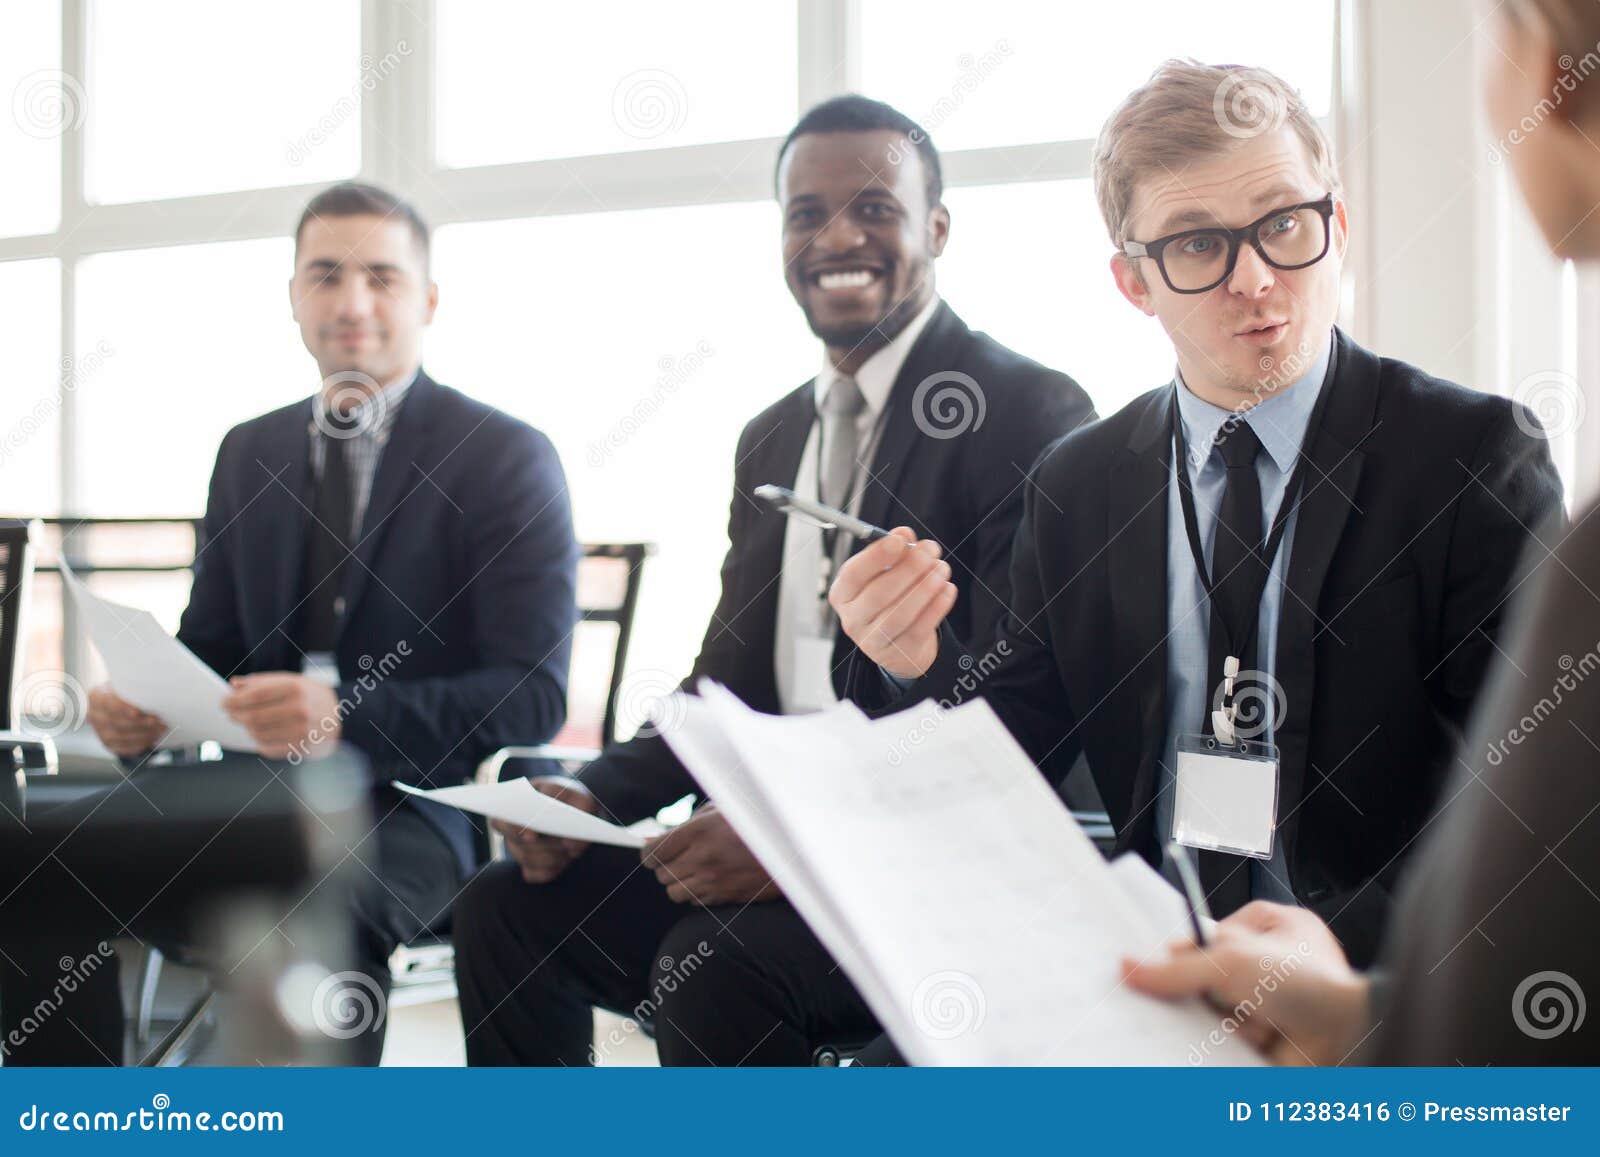 Speakers talking stock photo. Image of discussing, businessman 112383416